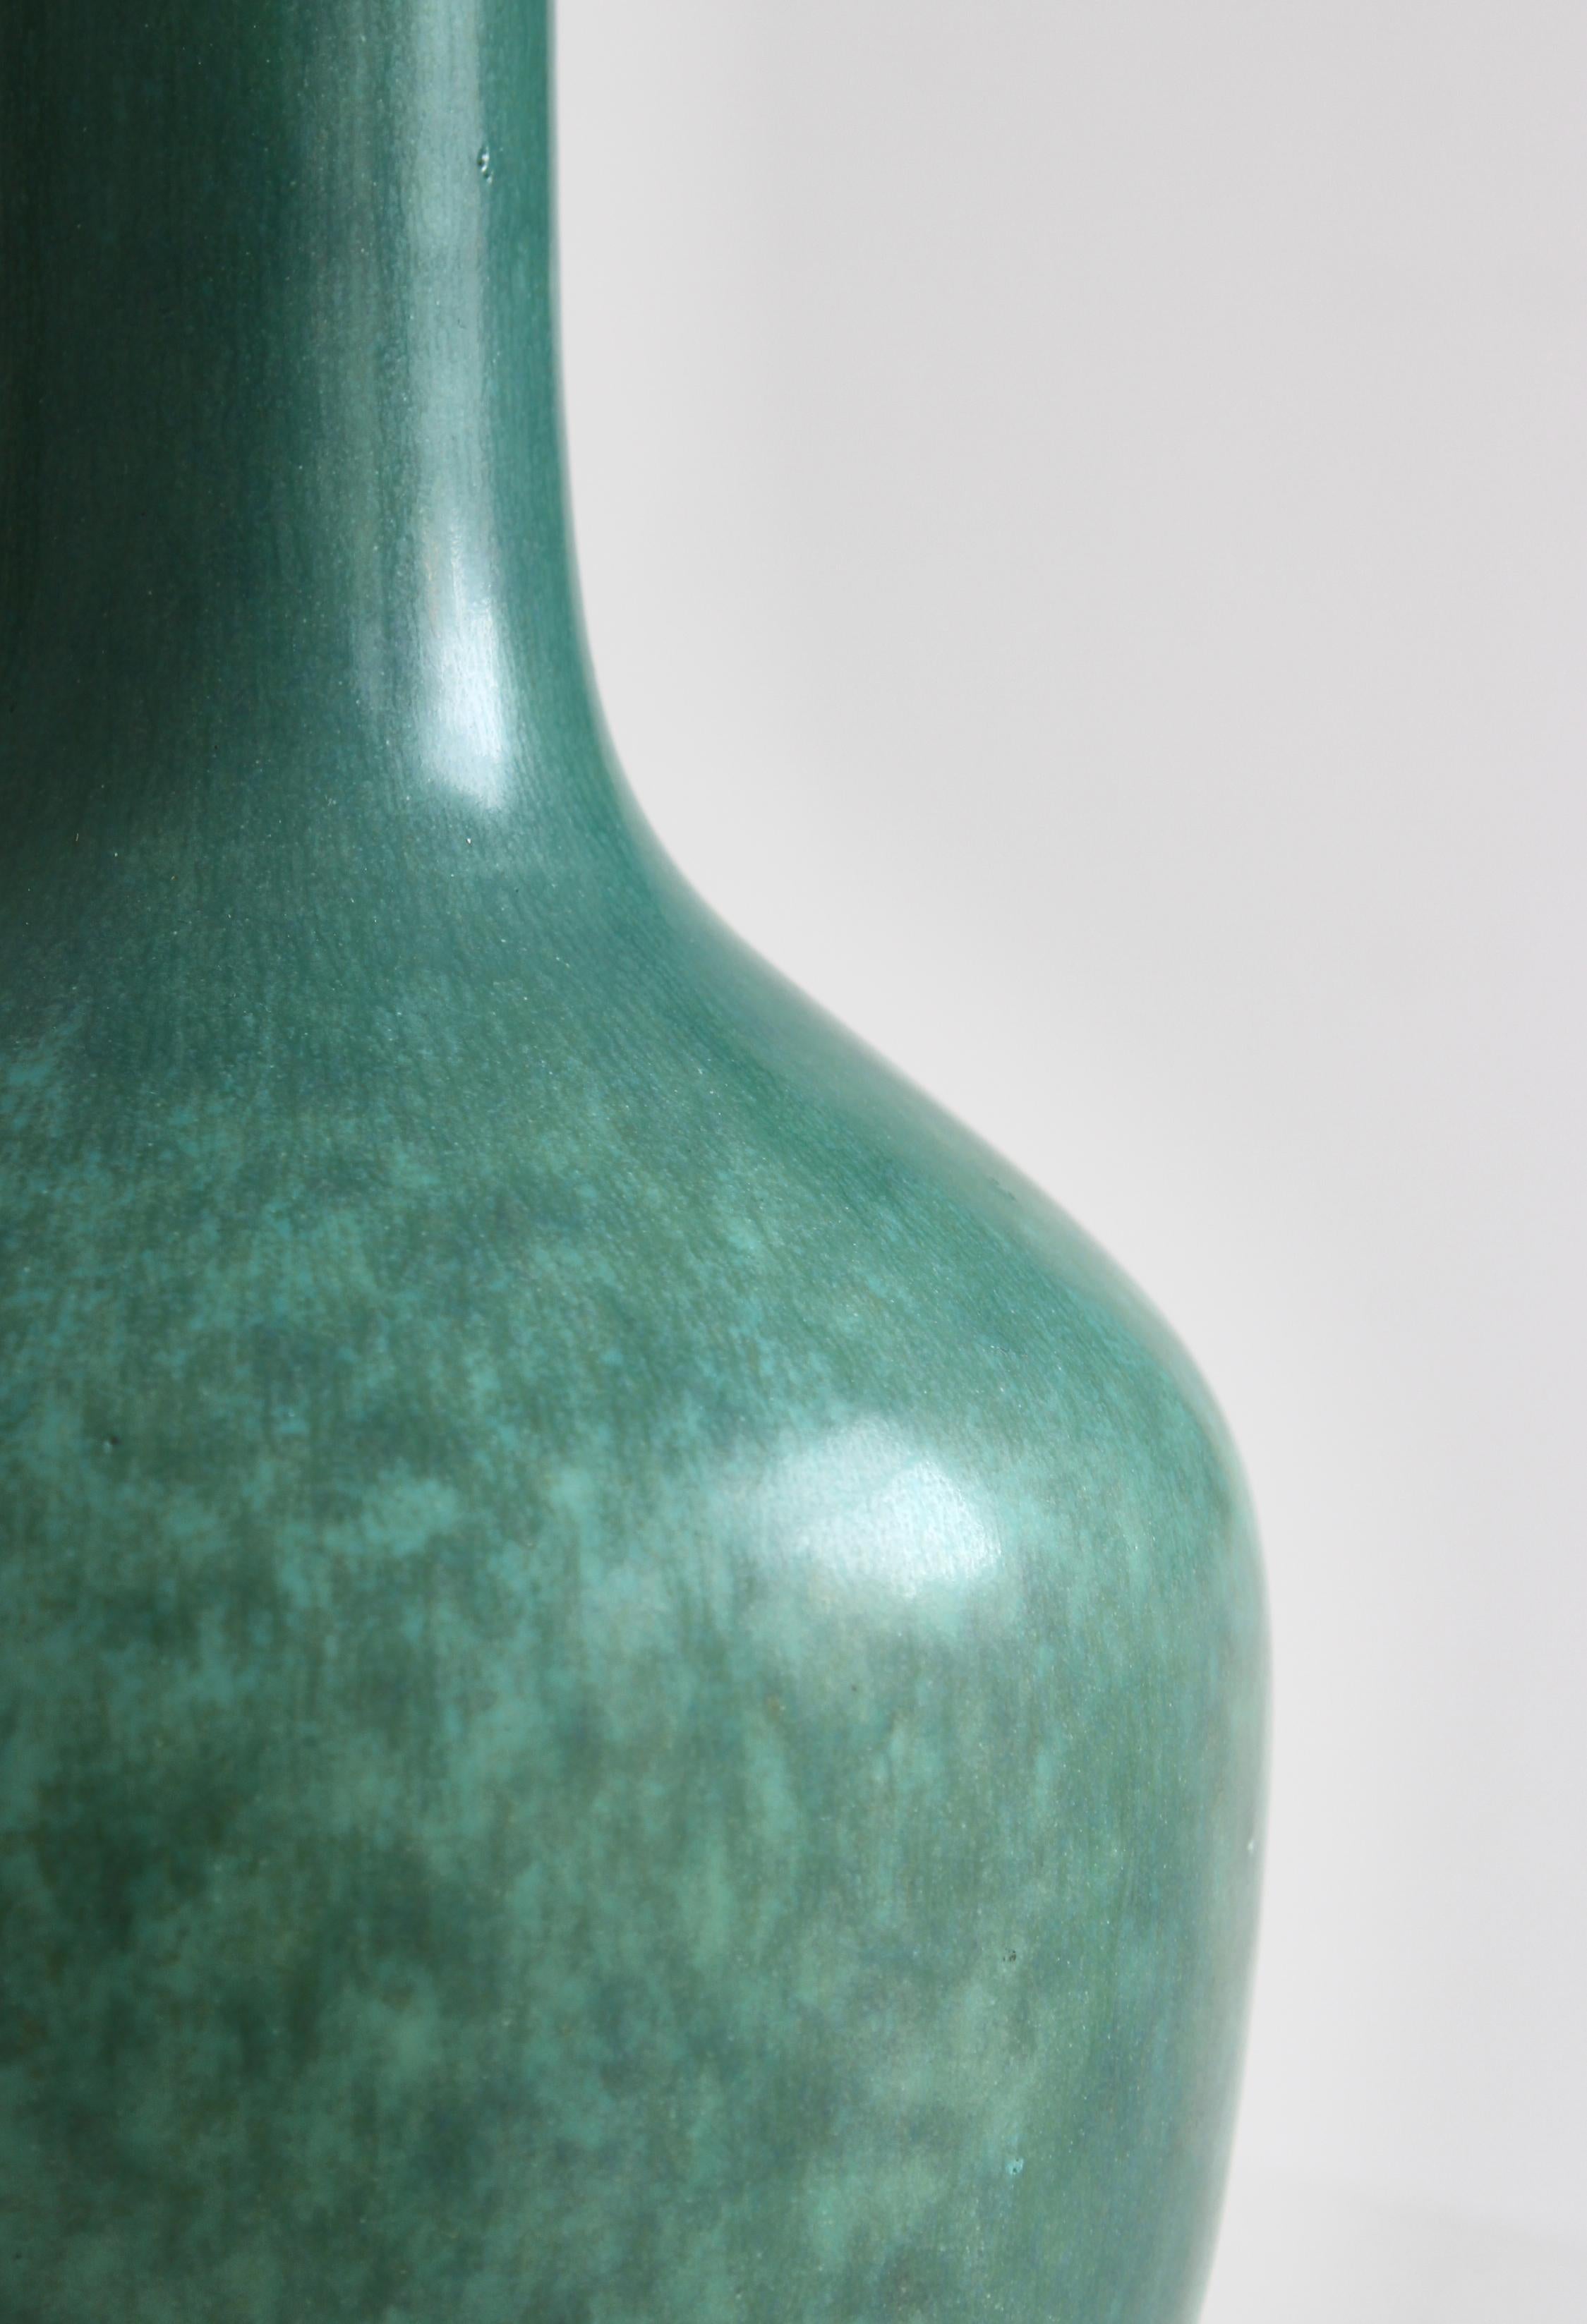 Mid-20th Century Stoneware Table Lamp by Saxbo Green Glazing Eva Staehr-Nielsen, Denmark, 1940s For Sale